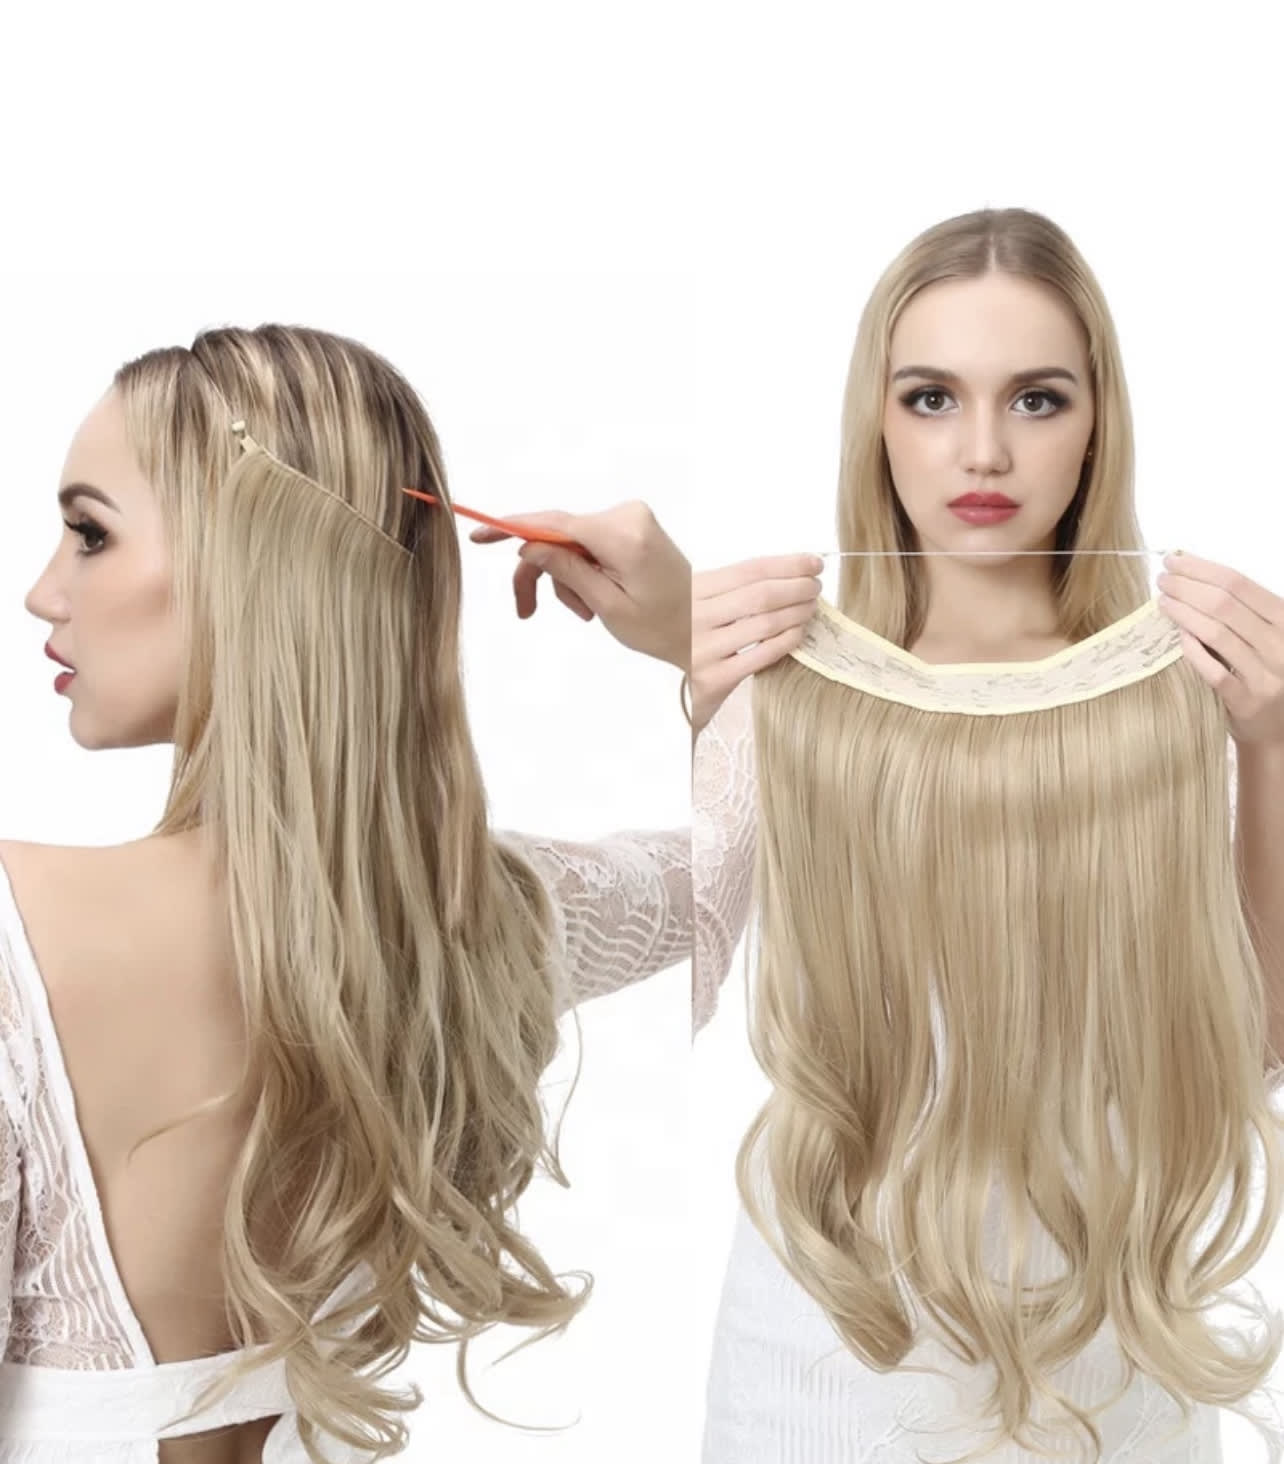 Ellcou Invisible Hair Extension - Extensions - Ellcou Beauty LLC | Wigs ...